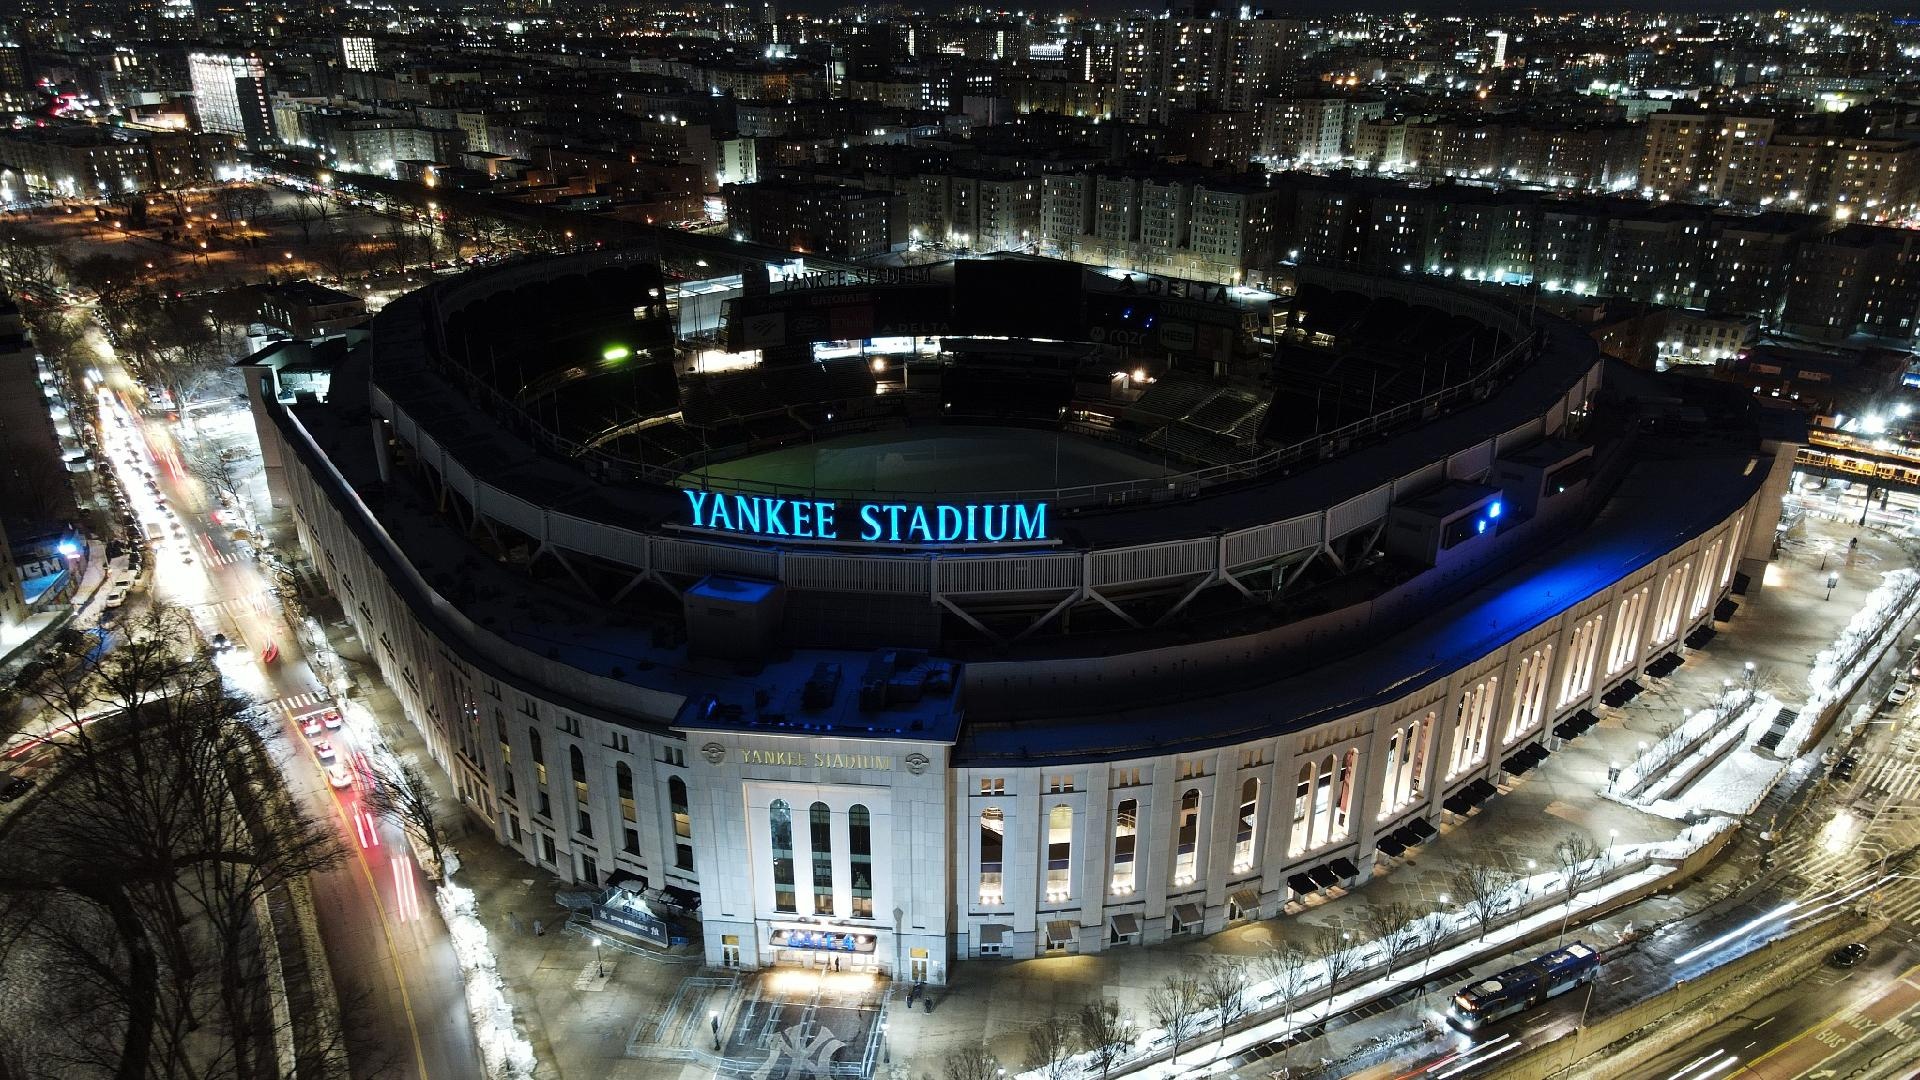 Stadium audience, Safety measures, Sport spectators, Pandemic guidelines, NY Yankees event, 1920x1080 Full HD Desktop